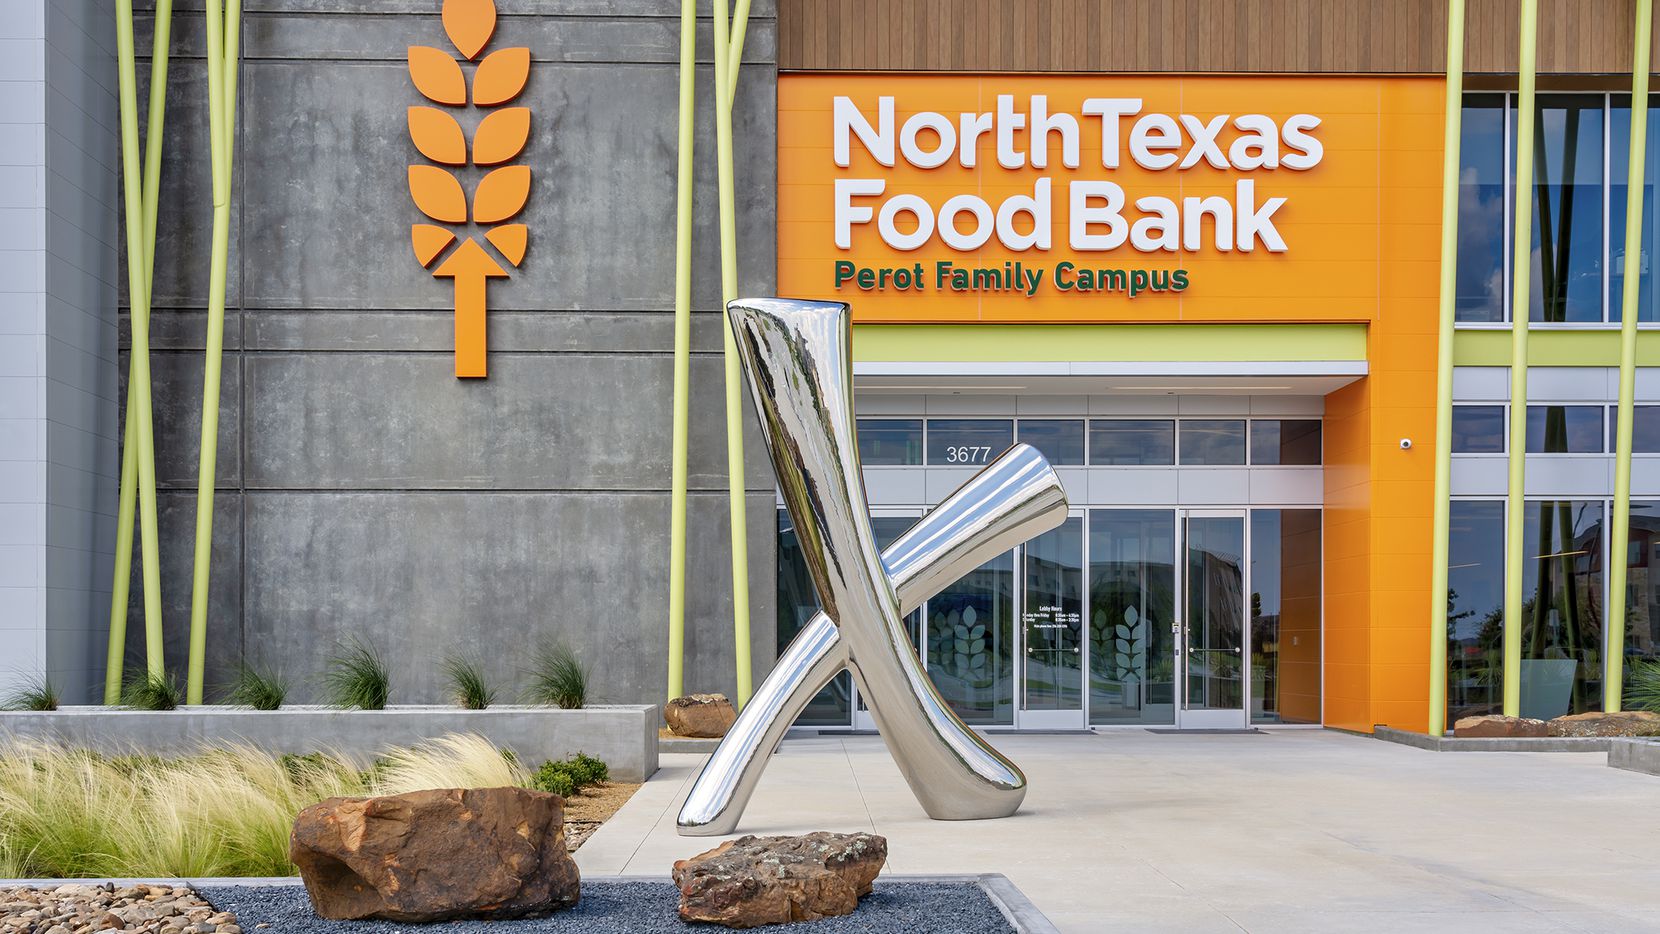 Exterior view of the new North Texas Food Bank facility with a large X sculpture out front.